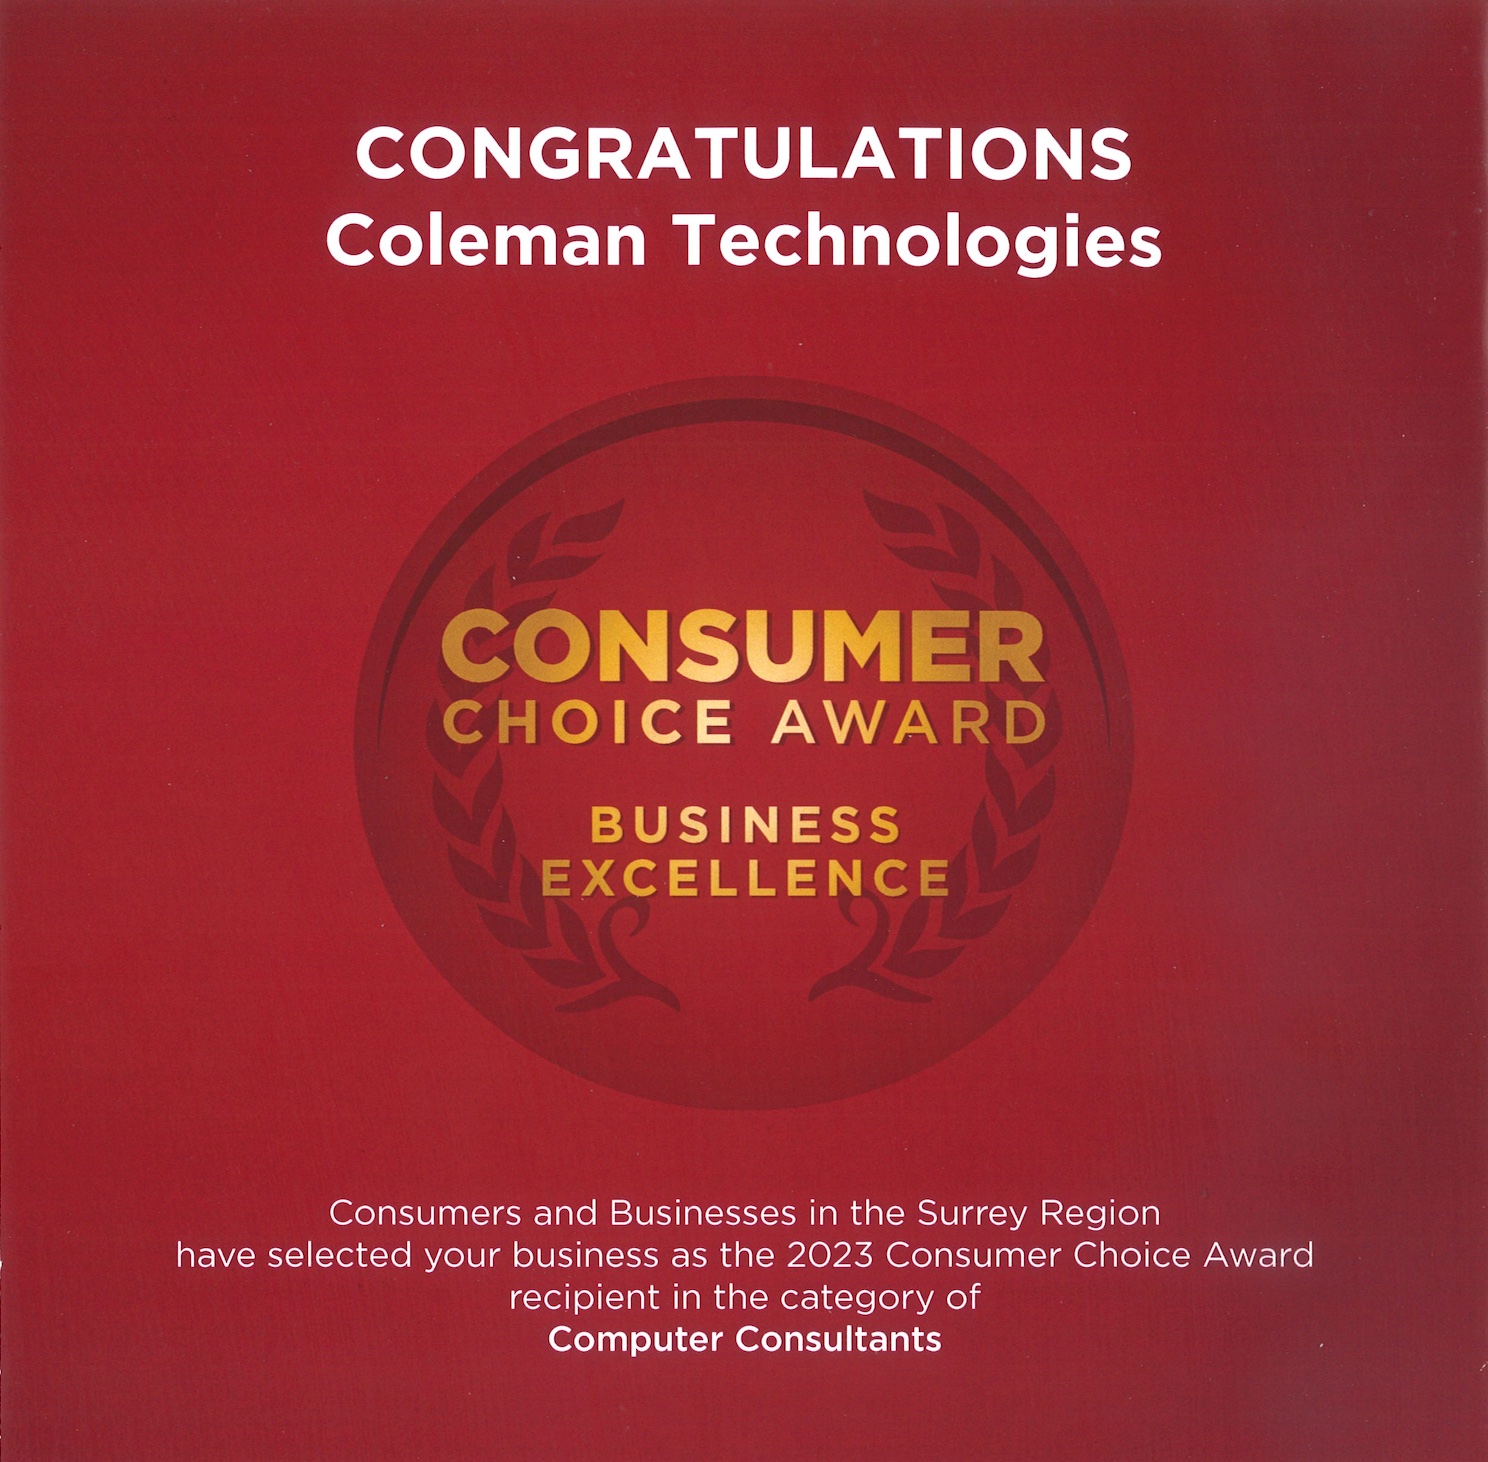 2023 Consumer Choice Award recipient in the category of COMPUTER CONSULTANTS